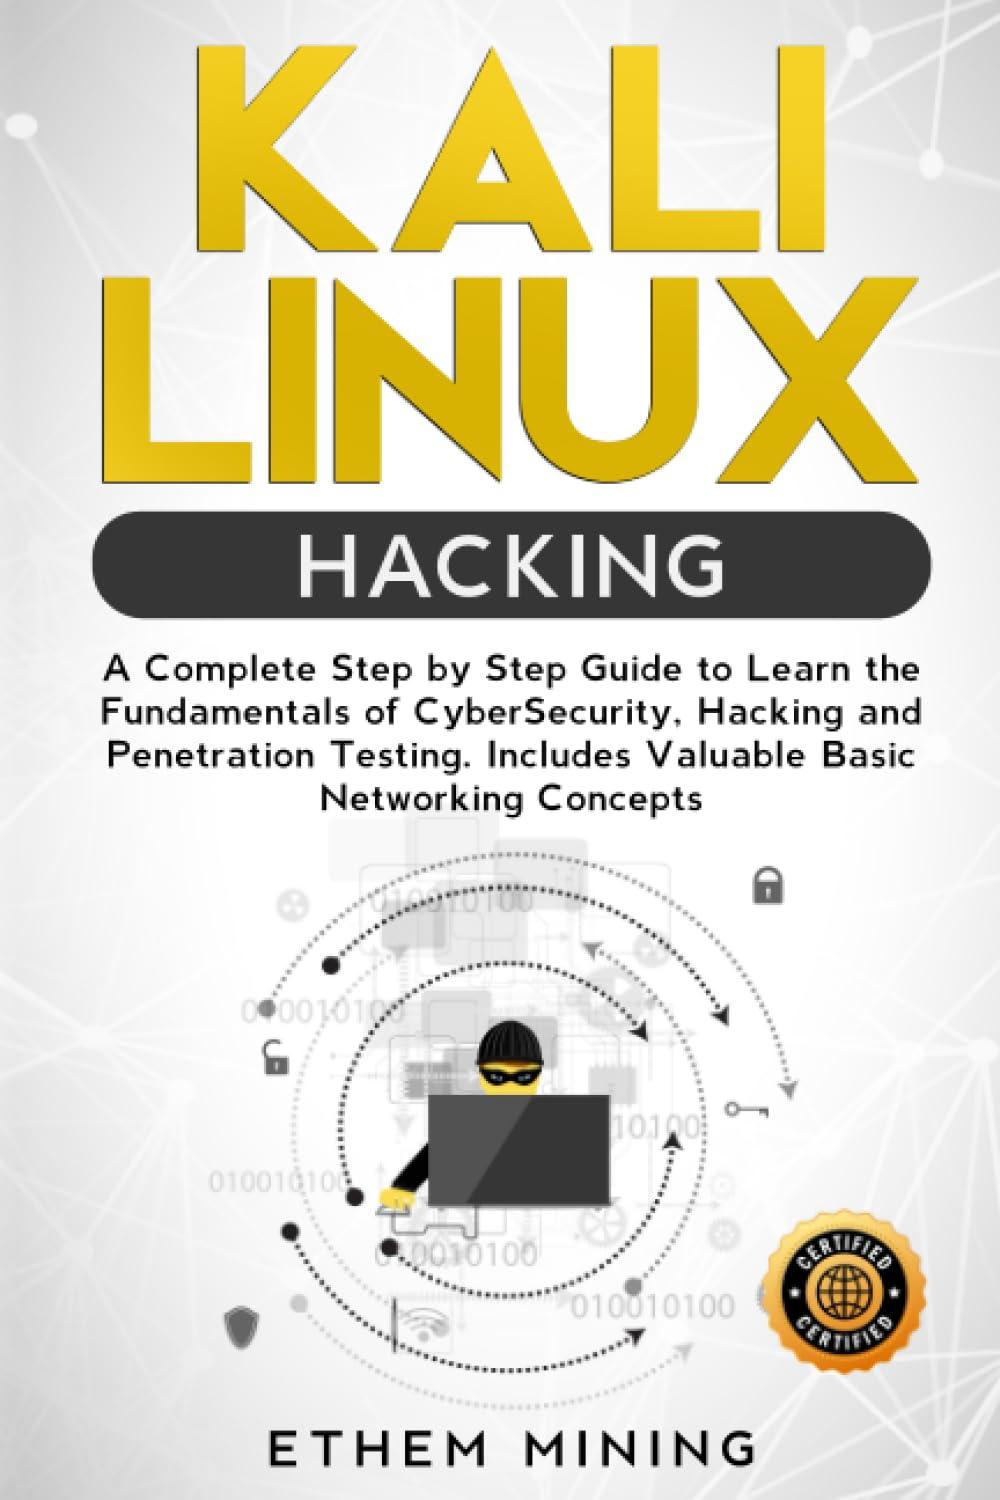 kali linux hacking a complete step by step guide to learn the fundamentals of cyber security hacking and